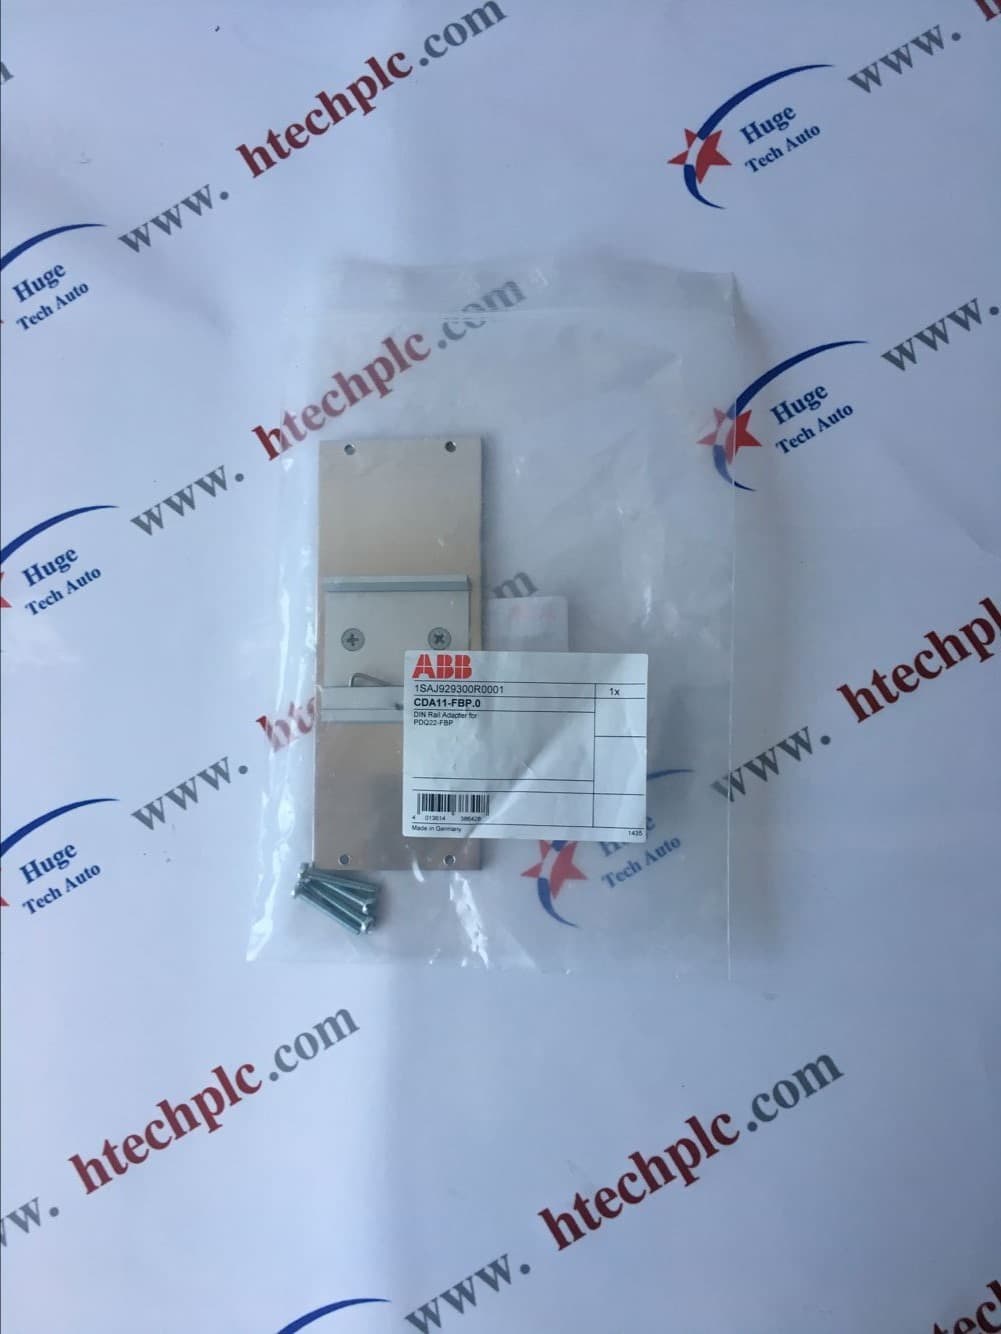 ABB GES9515133P000 industrial spare parts with 12 months war